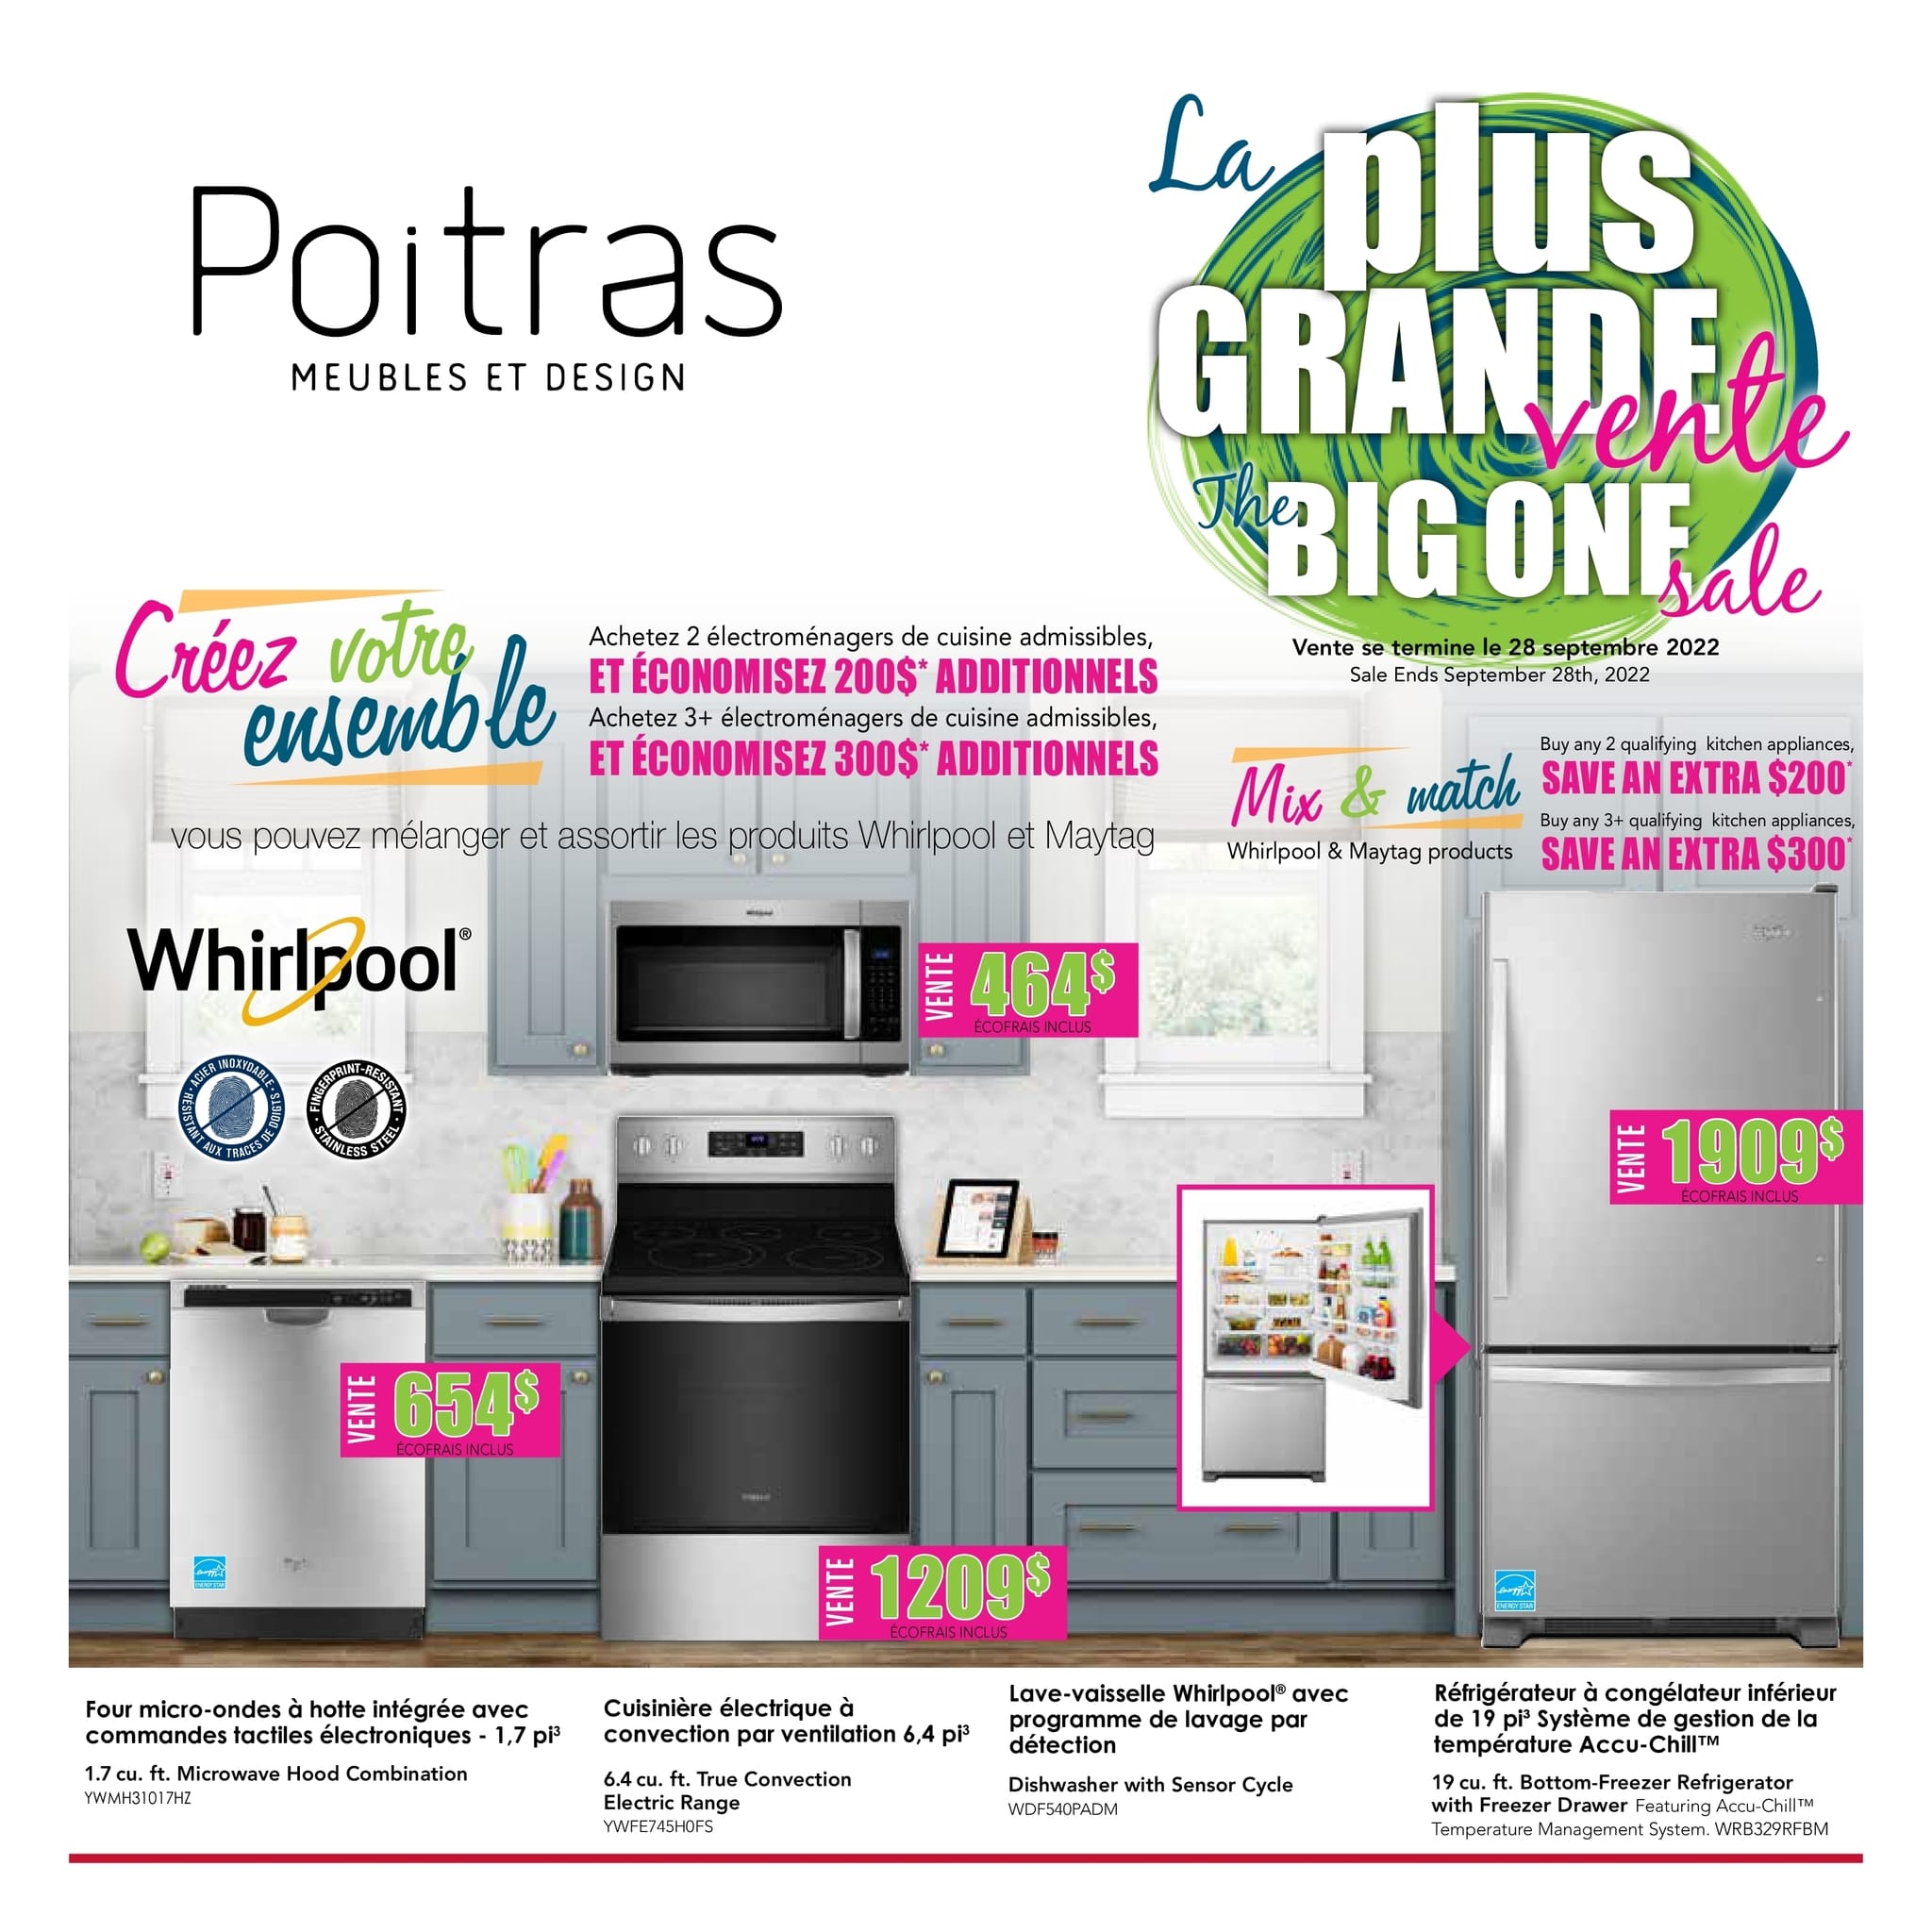 Circulaire Meubles Poitras - Whirlpool - Page 1